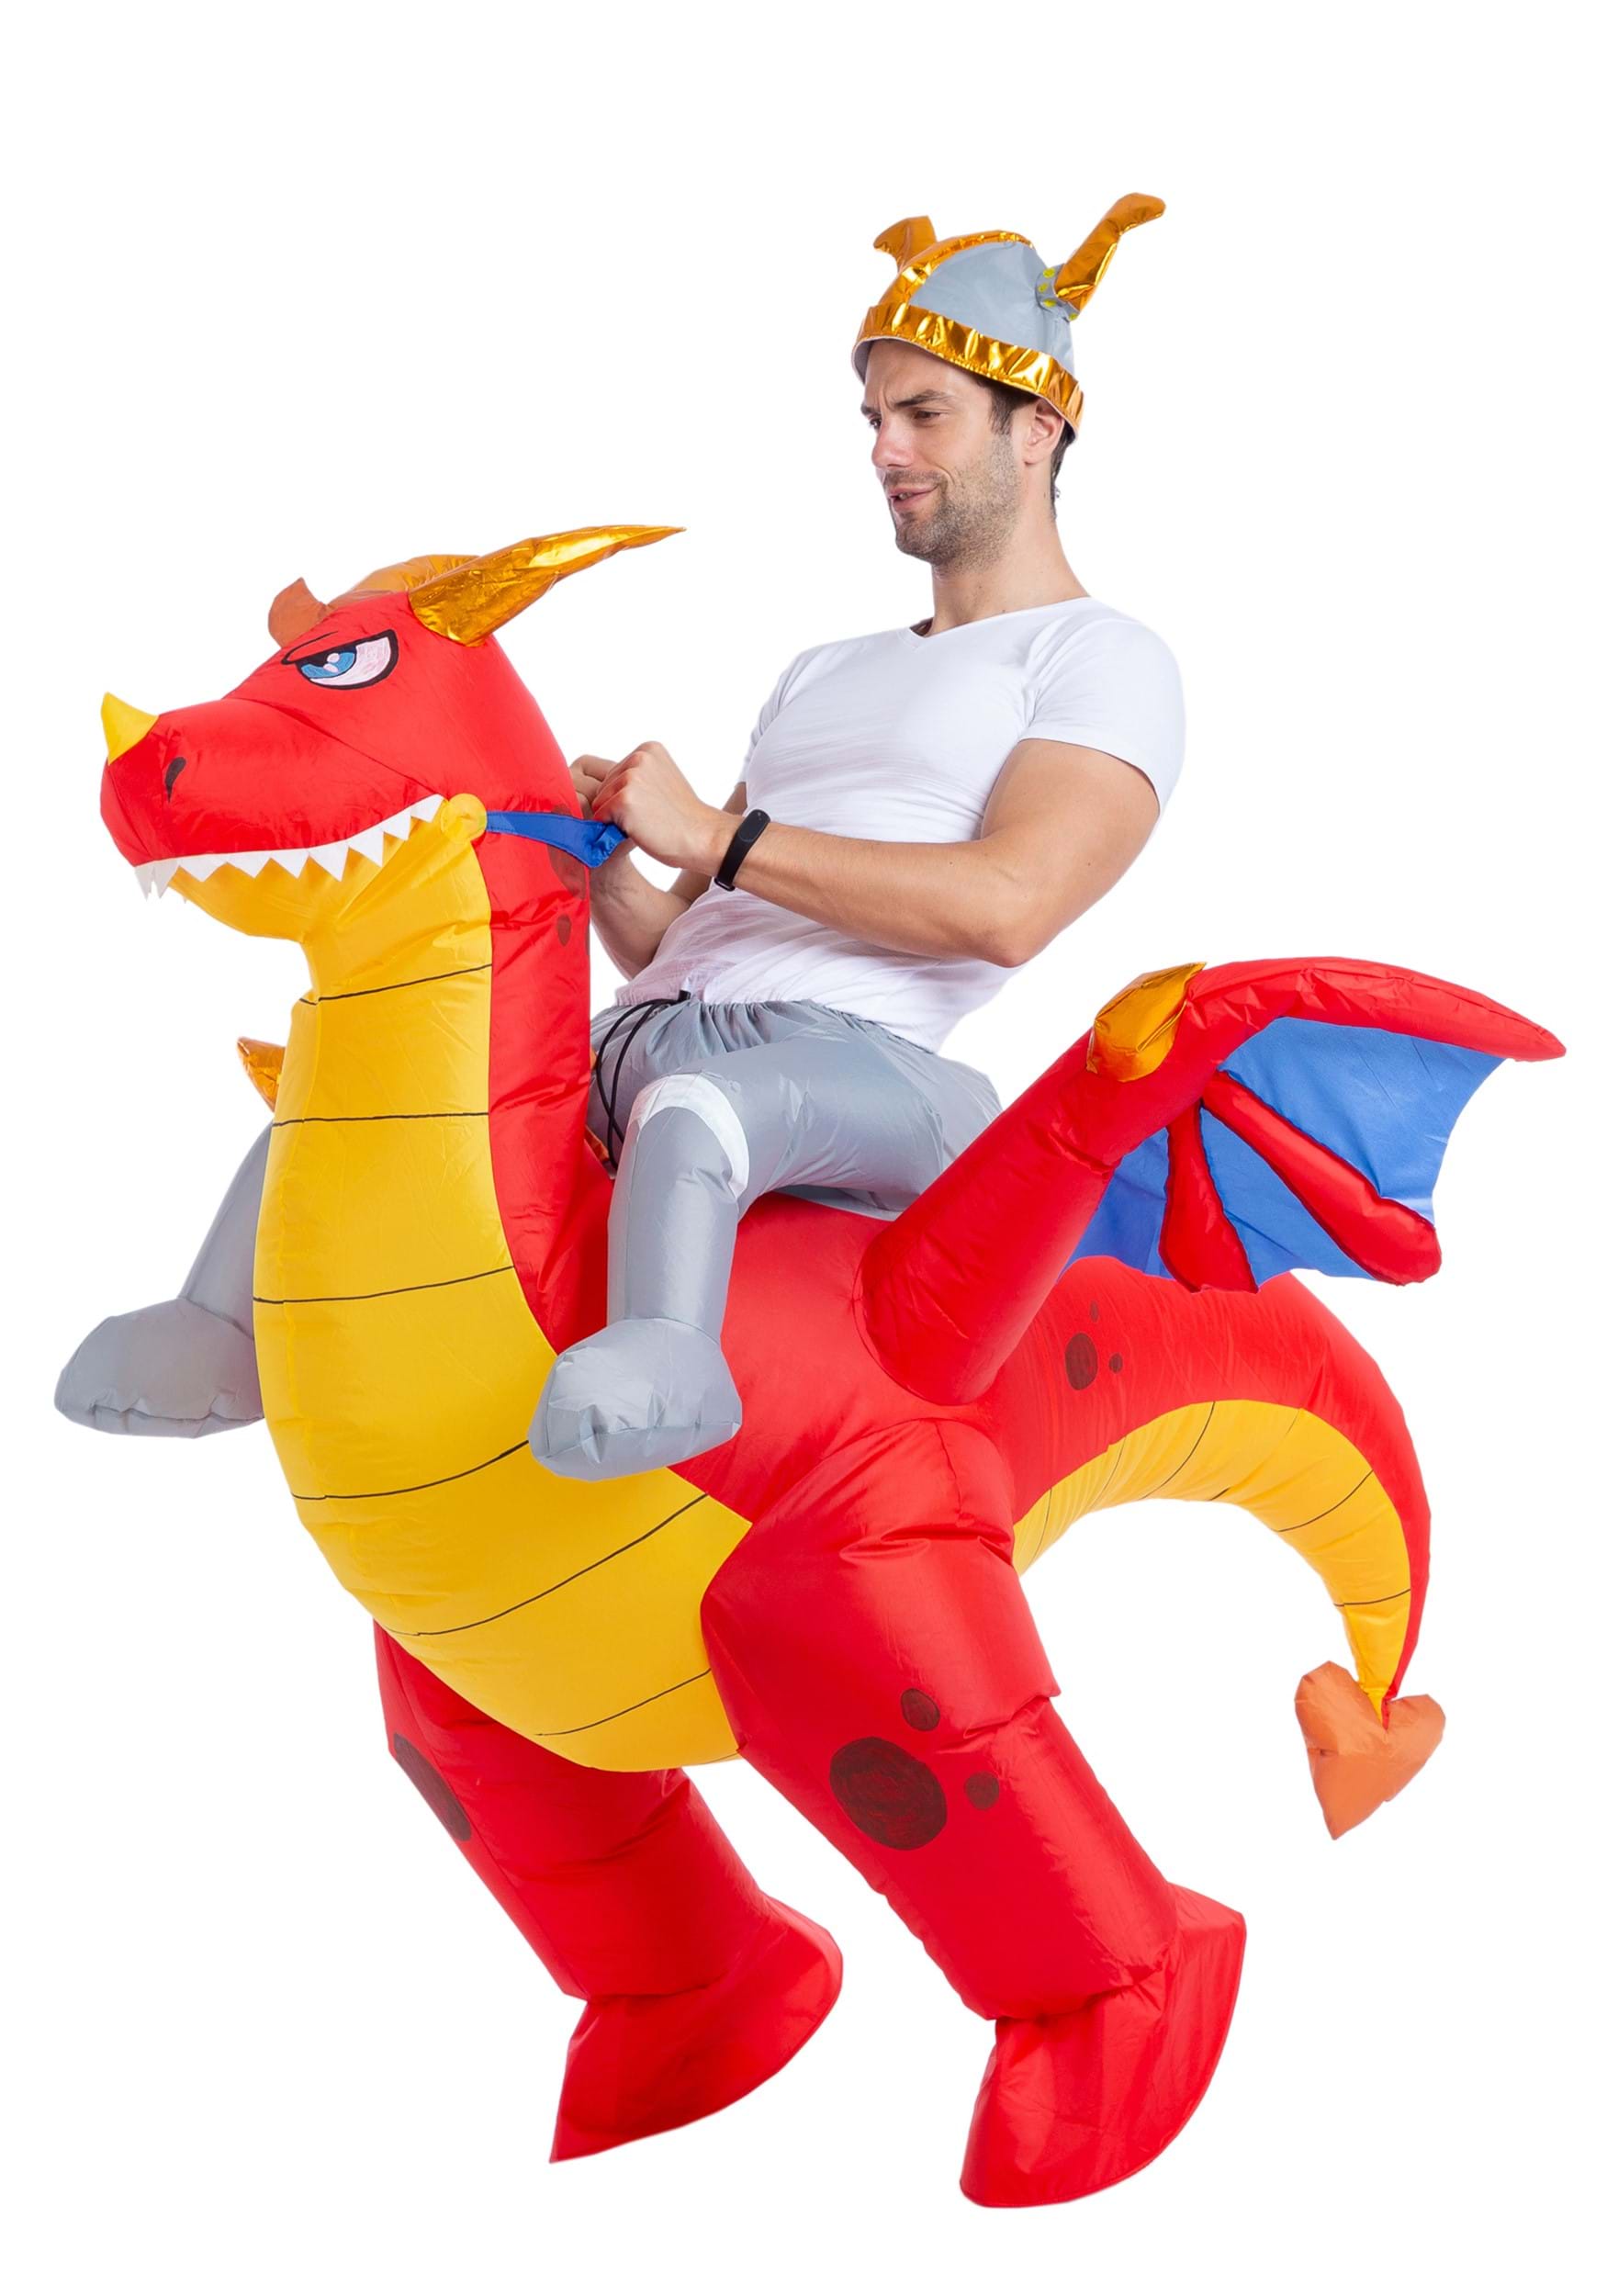 Adult Riding a Fire Dragon Inflatable Costume